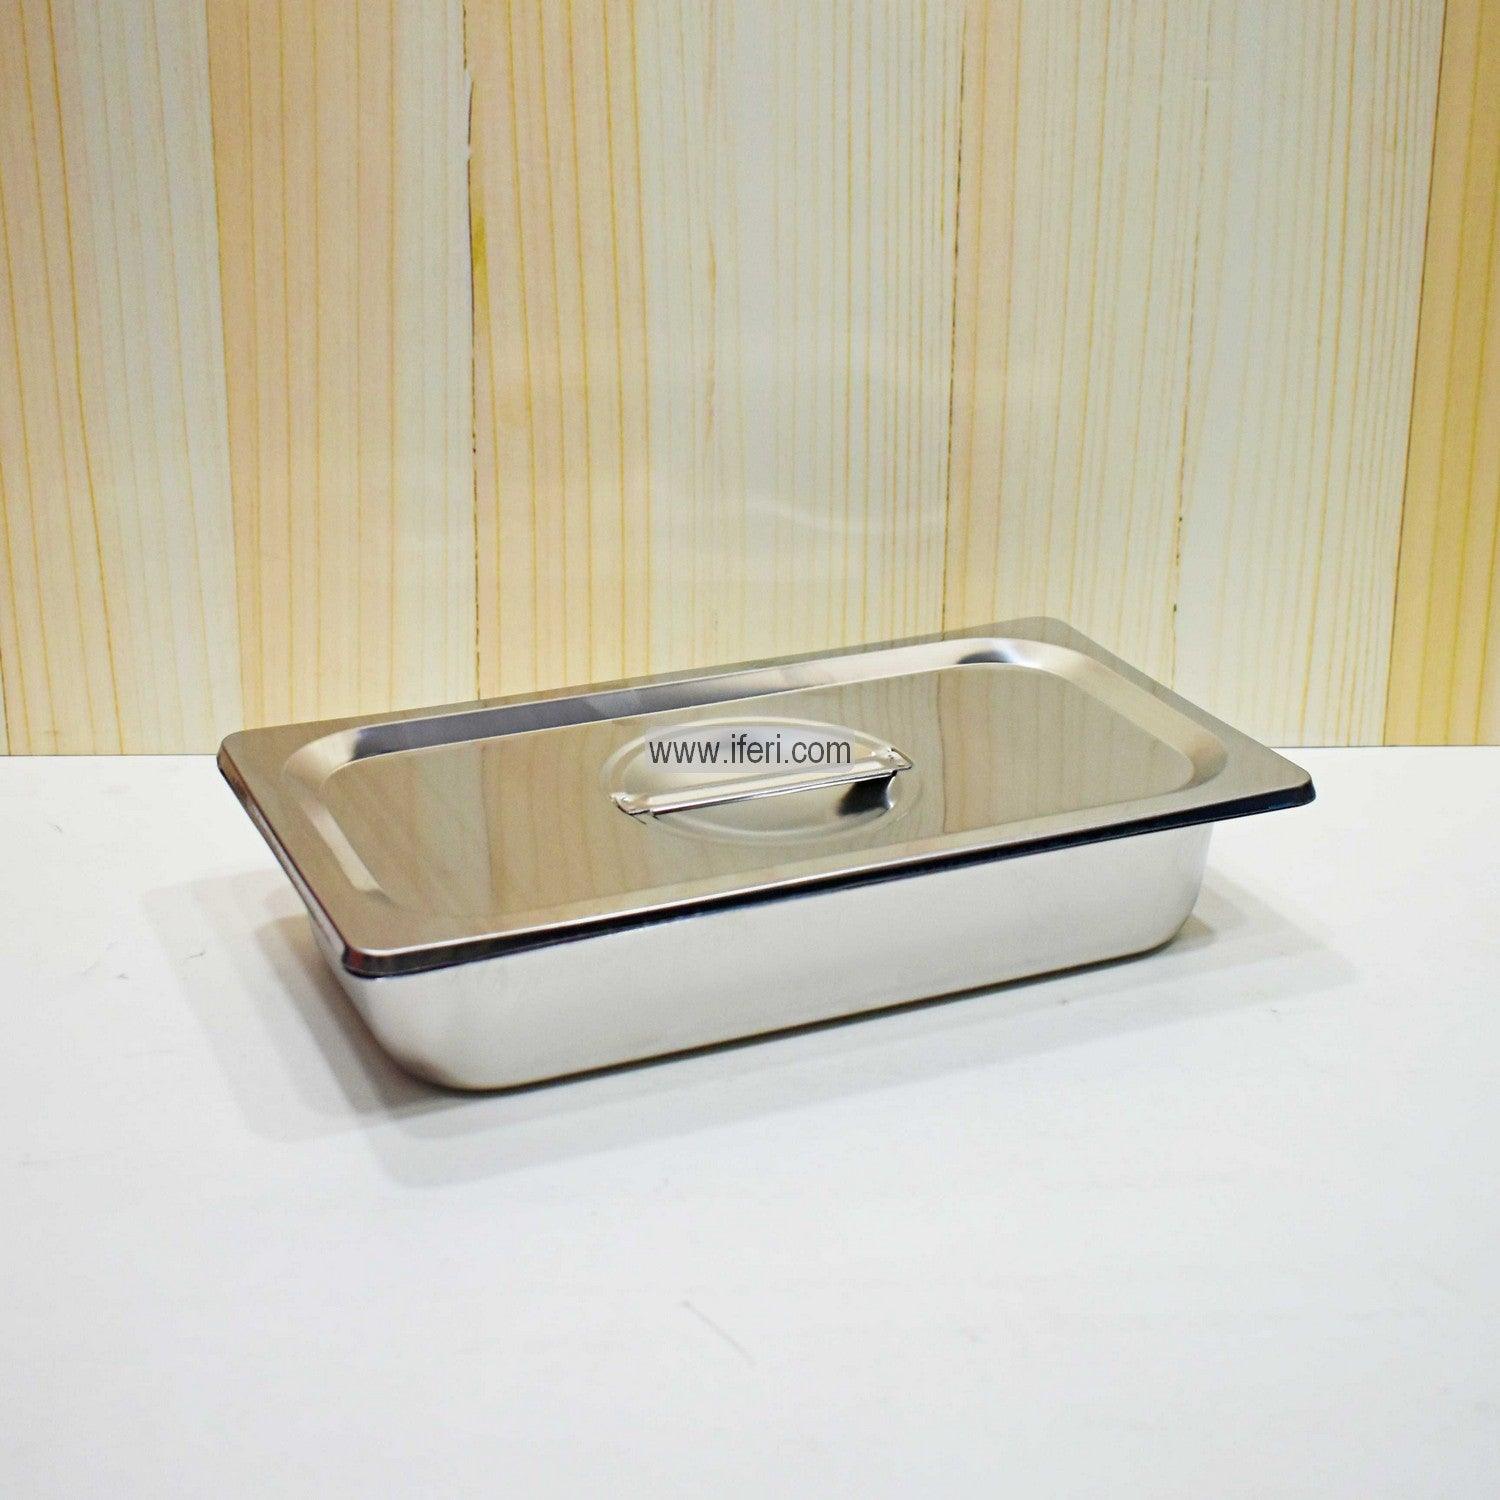 12.8 Inch Stainless Steel Food Pan with Lid SN0580 Price in Bangladesh - iferi.com